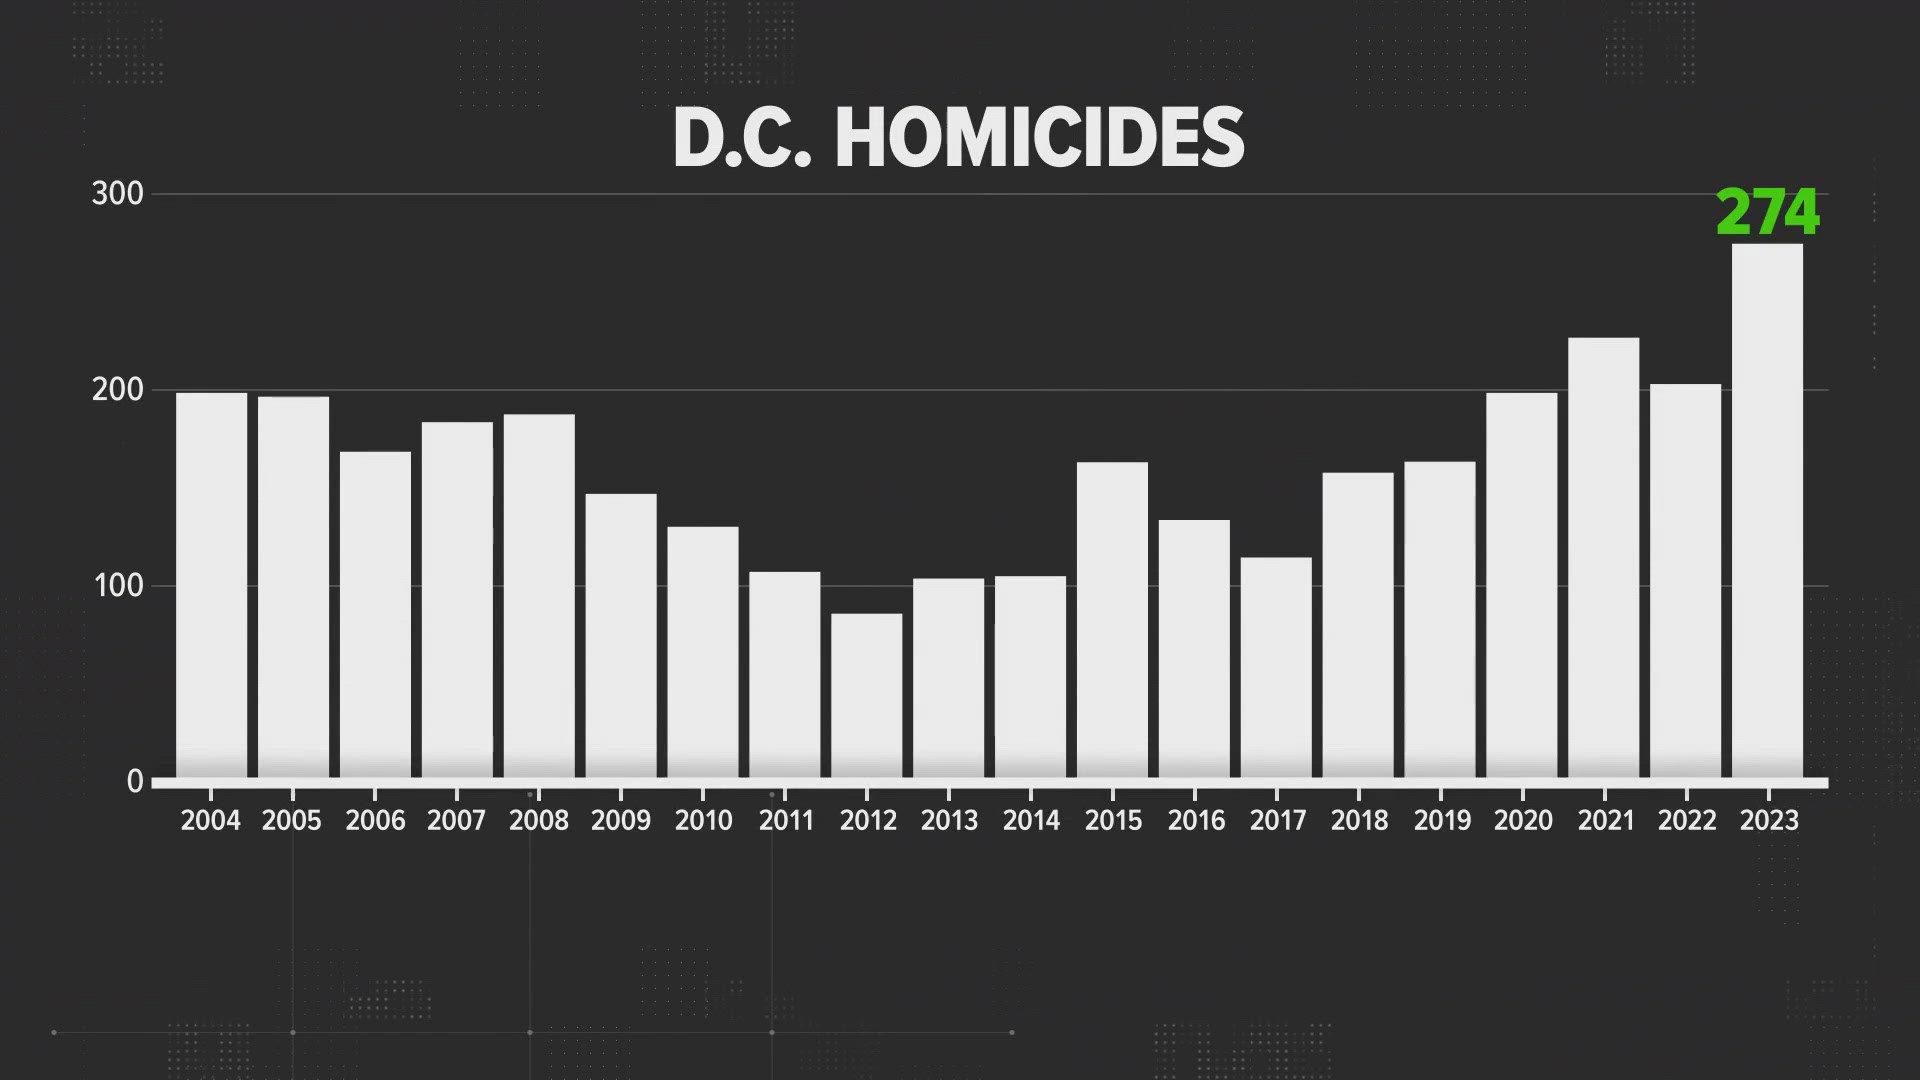 As we enter the halfway point of the year, crime data managed by DC Police shows that overall crime is down in the District this year compared to last.